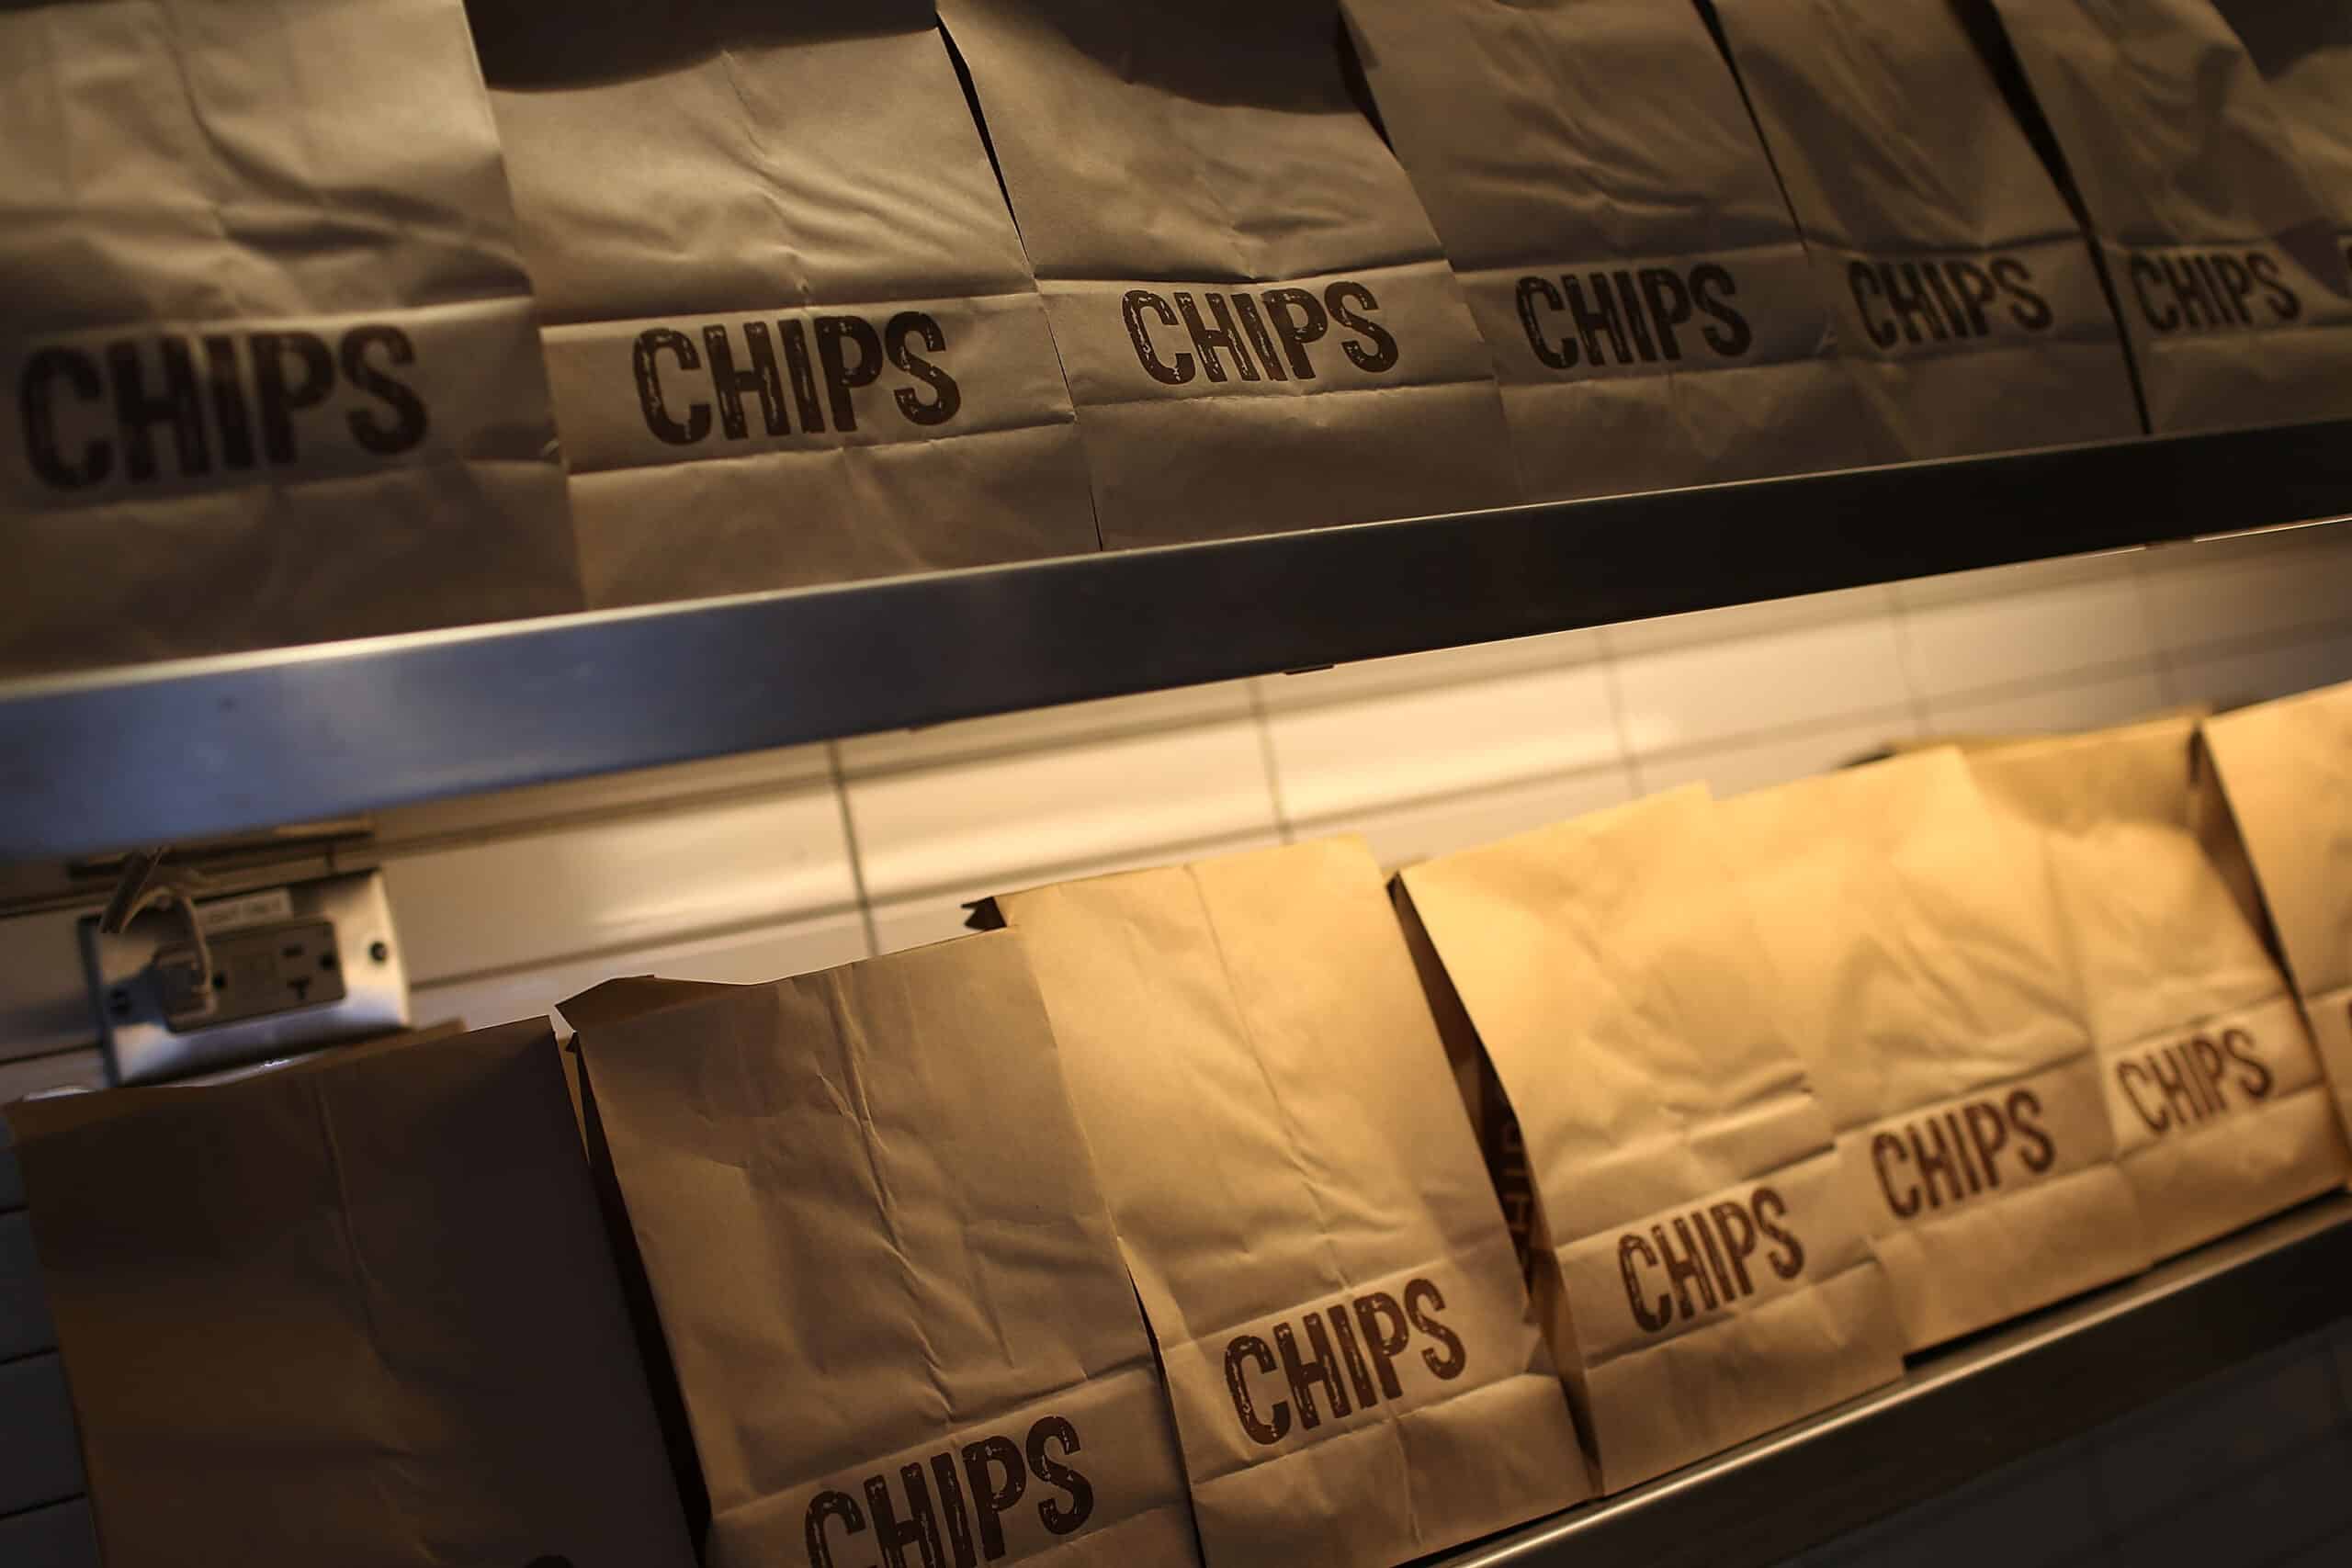 Chipotle chips